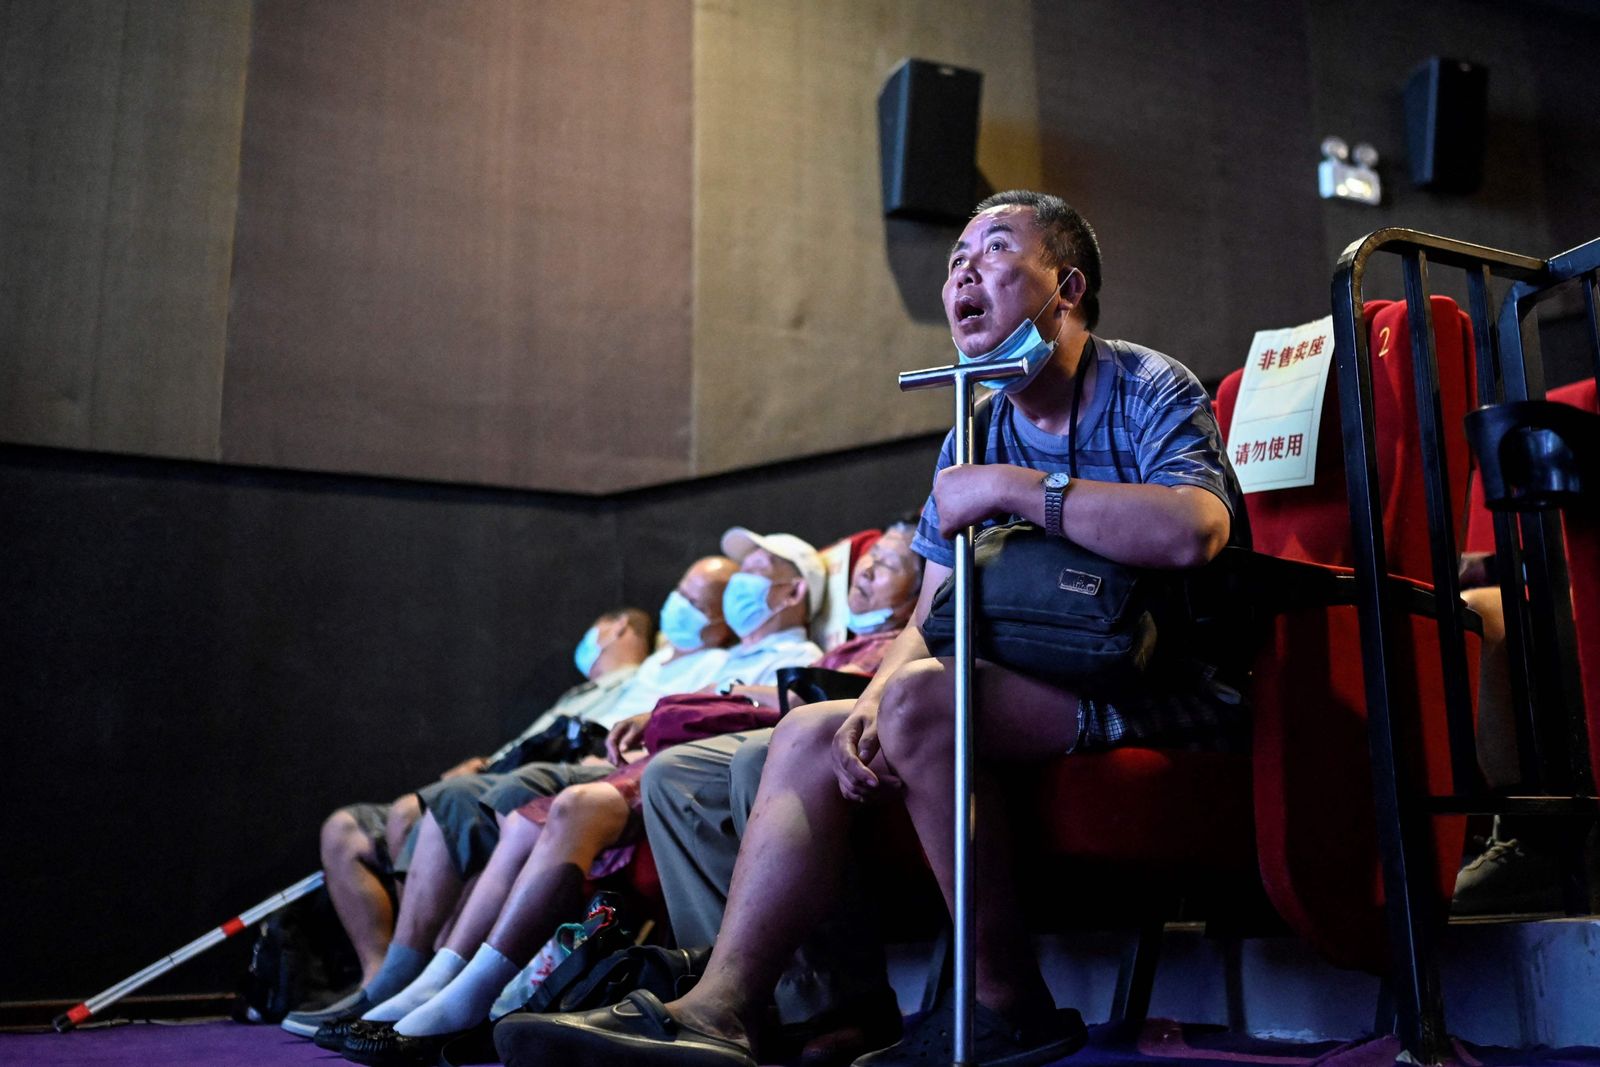 This photo taken on August 7, 2021 shows visually impaired people listening to the film narrator during a screening at a cinema in Beijing. - Dozens of blind moviegoers come to the Saturday screenings organised by Xin Mu Theater, a small group of volunteers who were the first to introduce films to blind audiences in China. (Photo by Jade GAO / AFP) / To go with AFP story China-social-disabled-film, FEATURE by Poornima WEERASEKARA and Danni ZHU - AFP